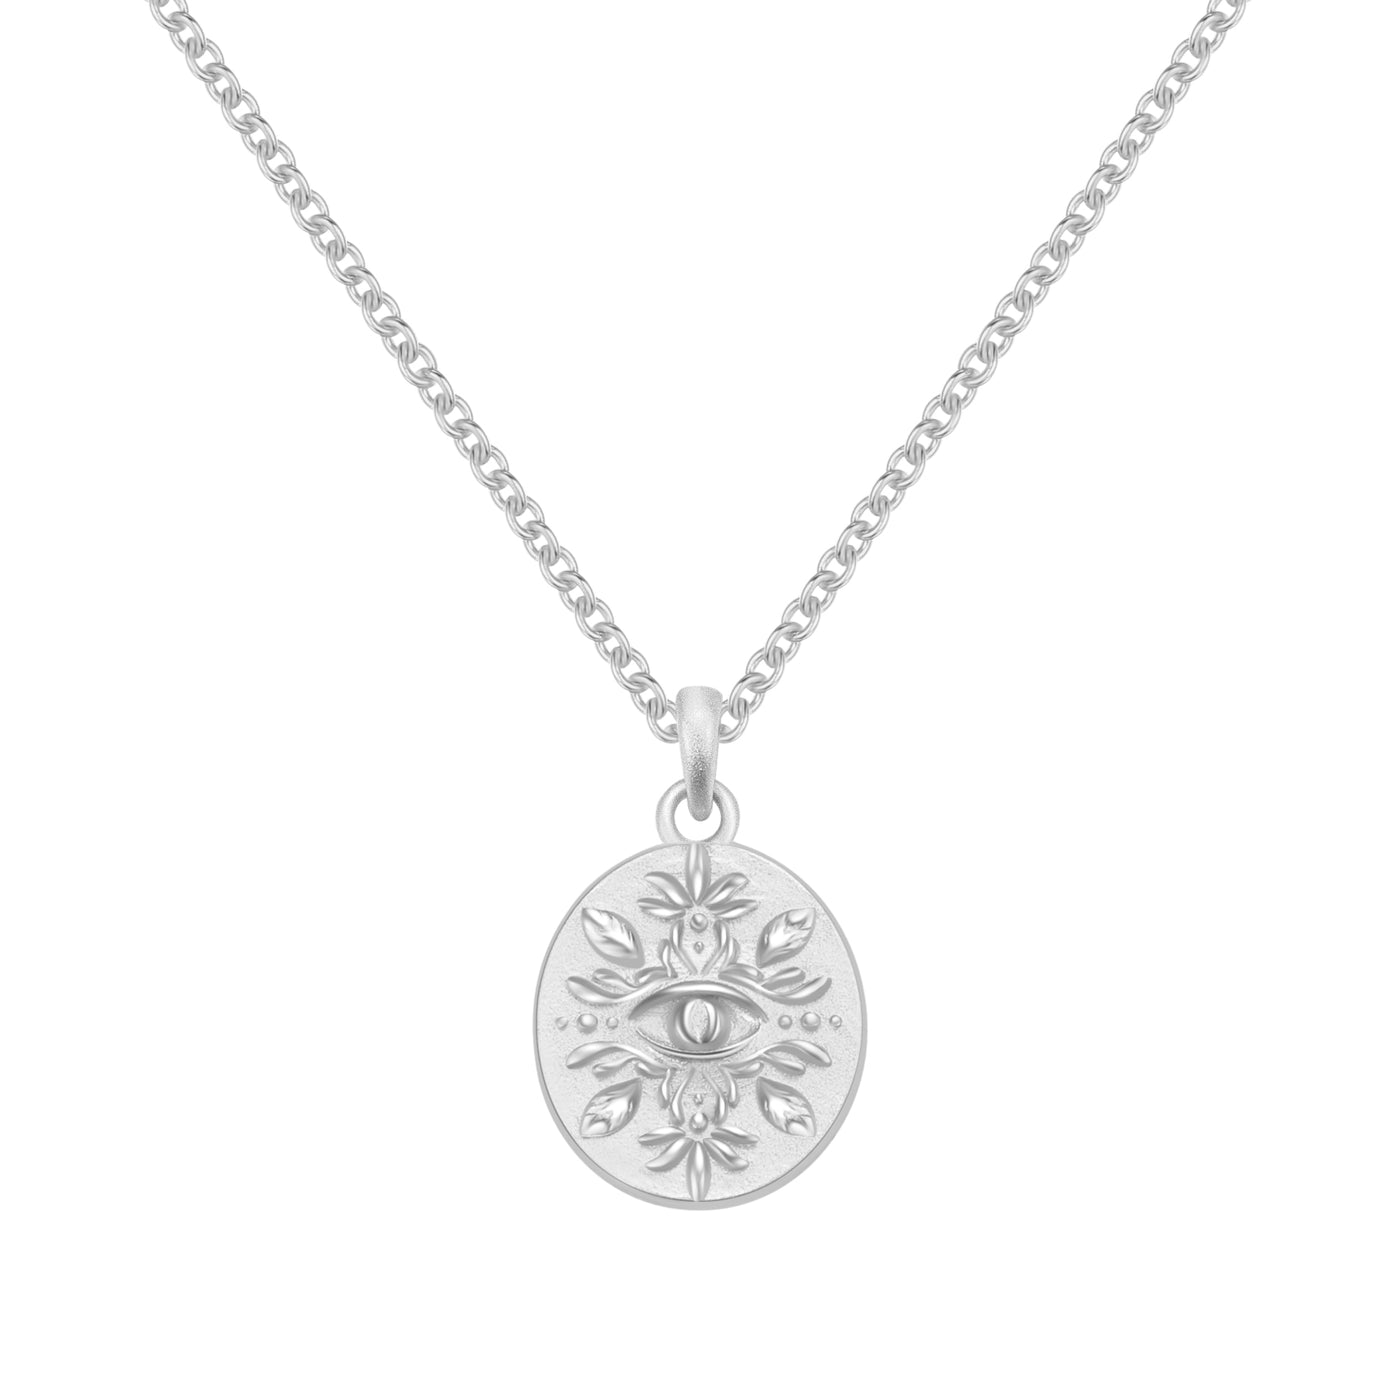 The Visionary Pendant Necklace Sterling Silver